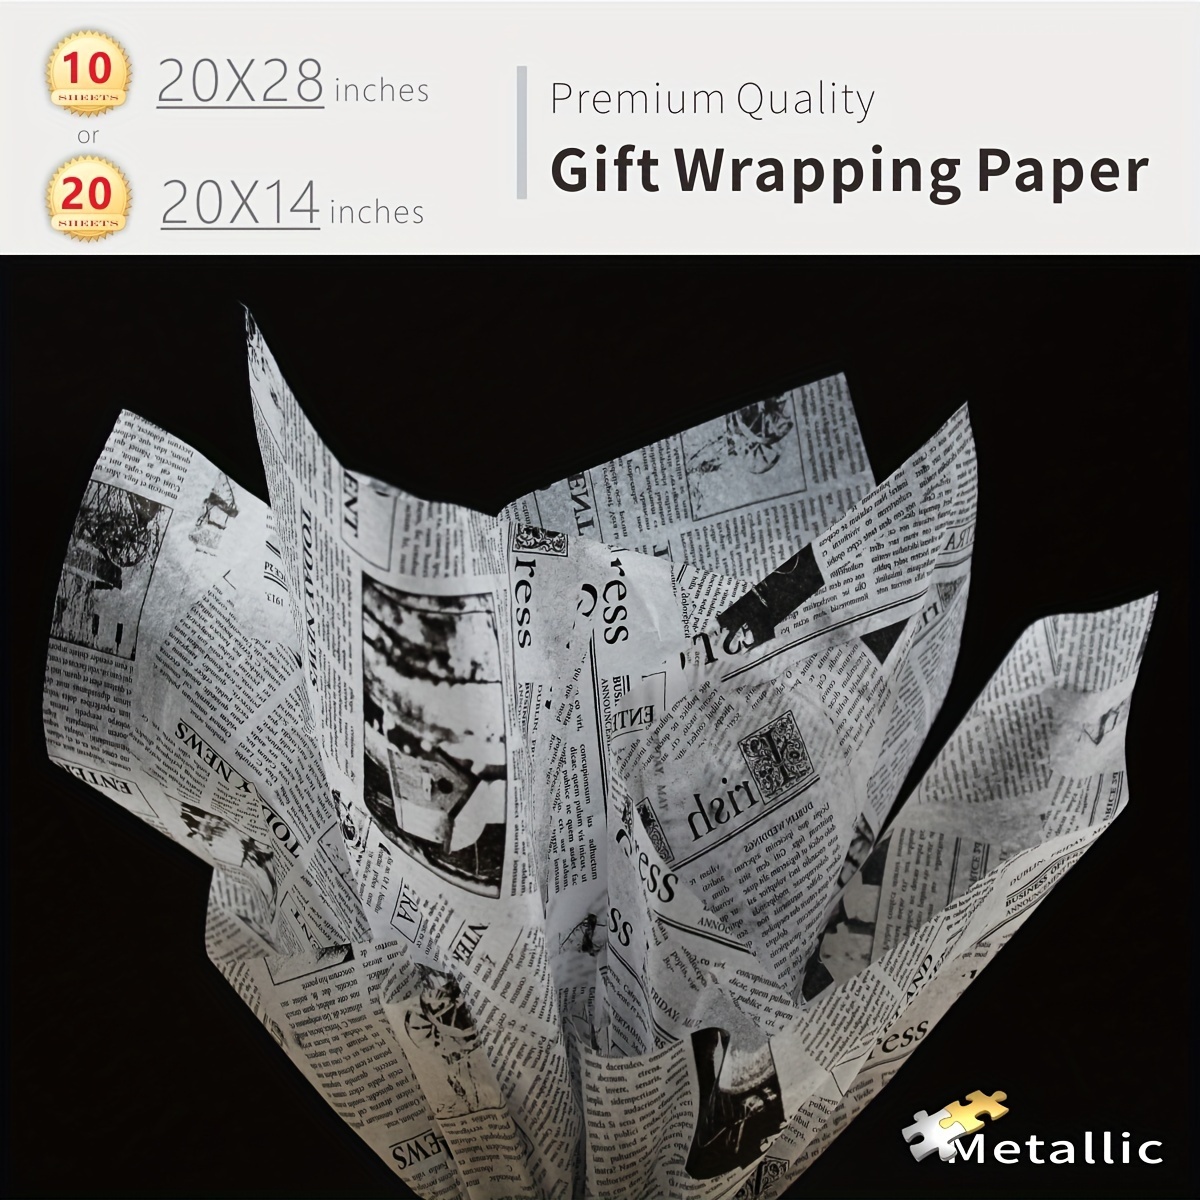 Orange Premium Tissue Paper Wrapper Paper 20 x 28 Inch (10 Sheets) Gift  Flower Wrapping Paper for Gift Bags, DIY Craft Supplies,Party Favors Goody